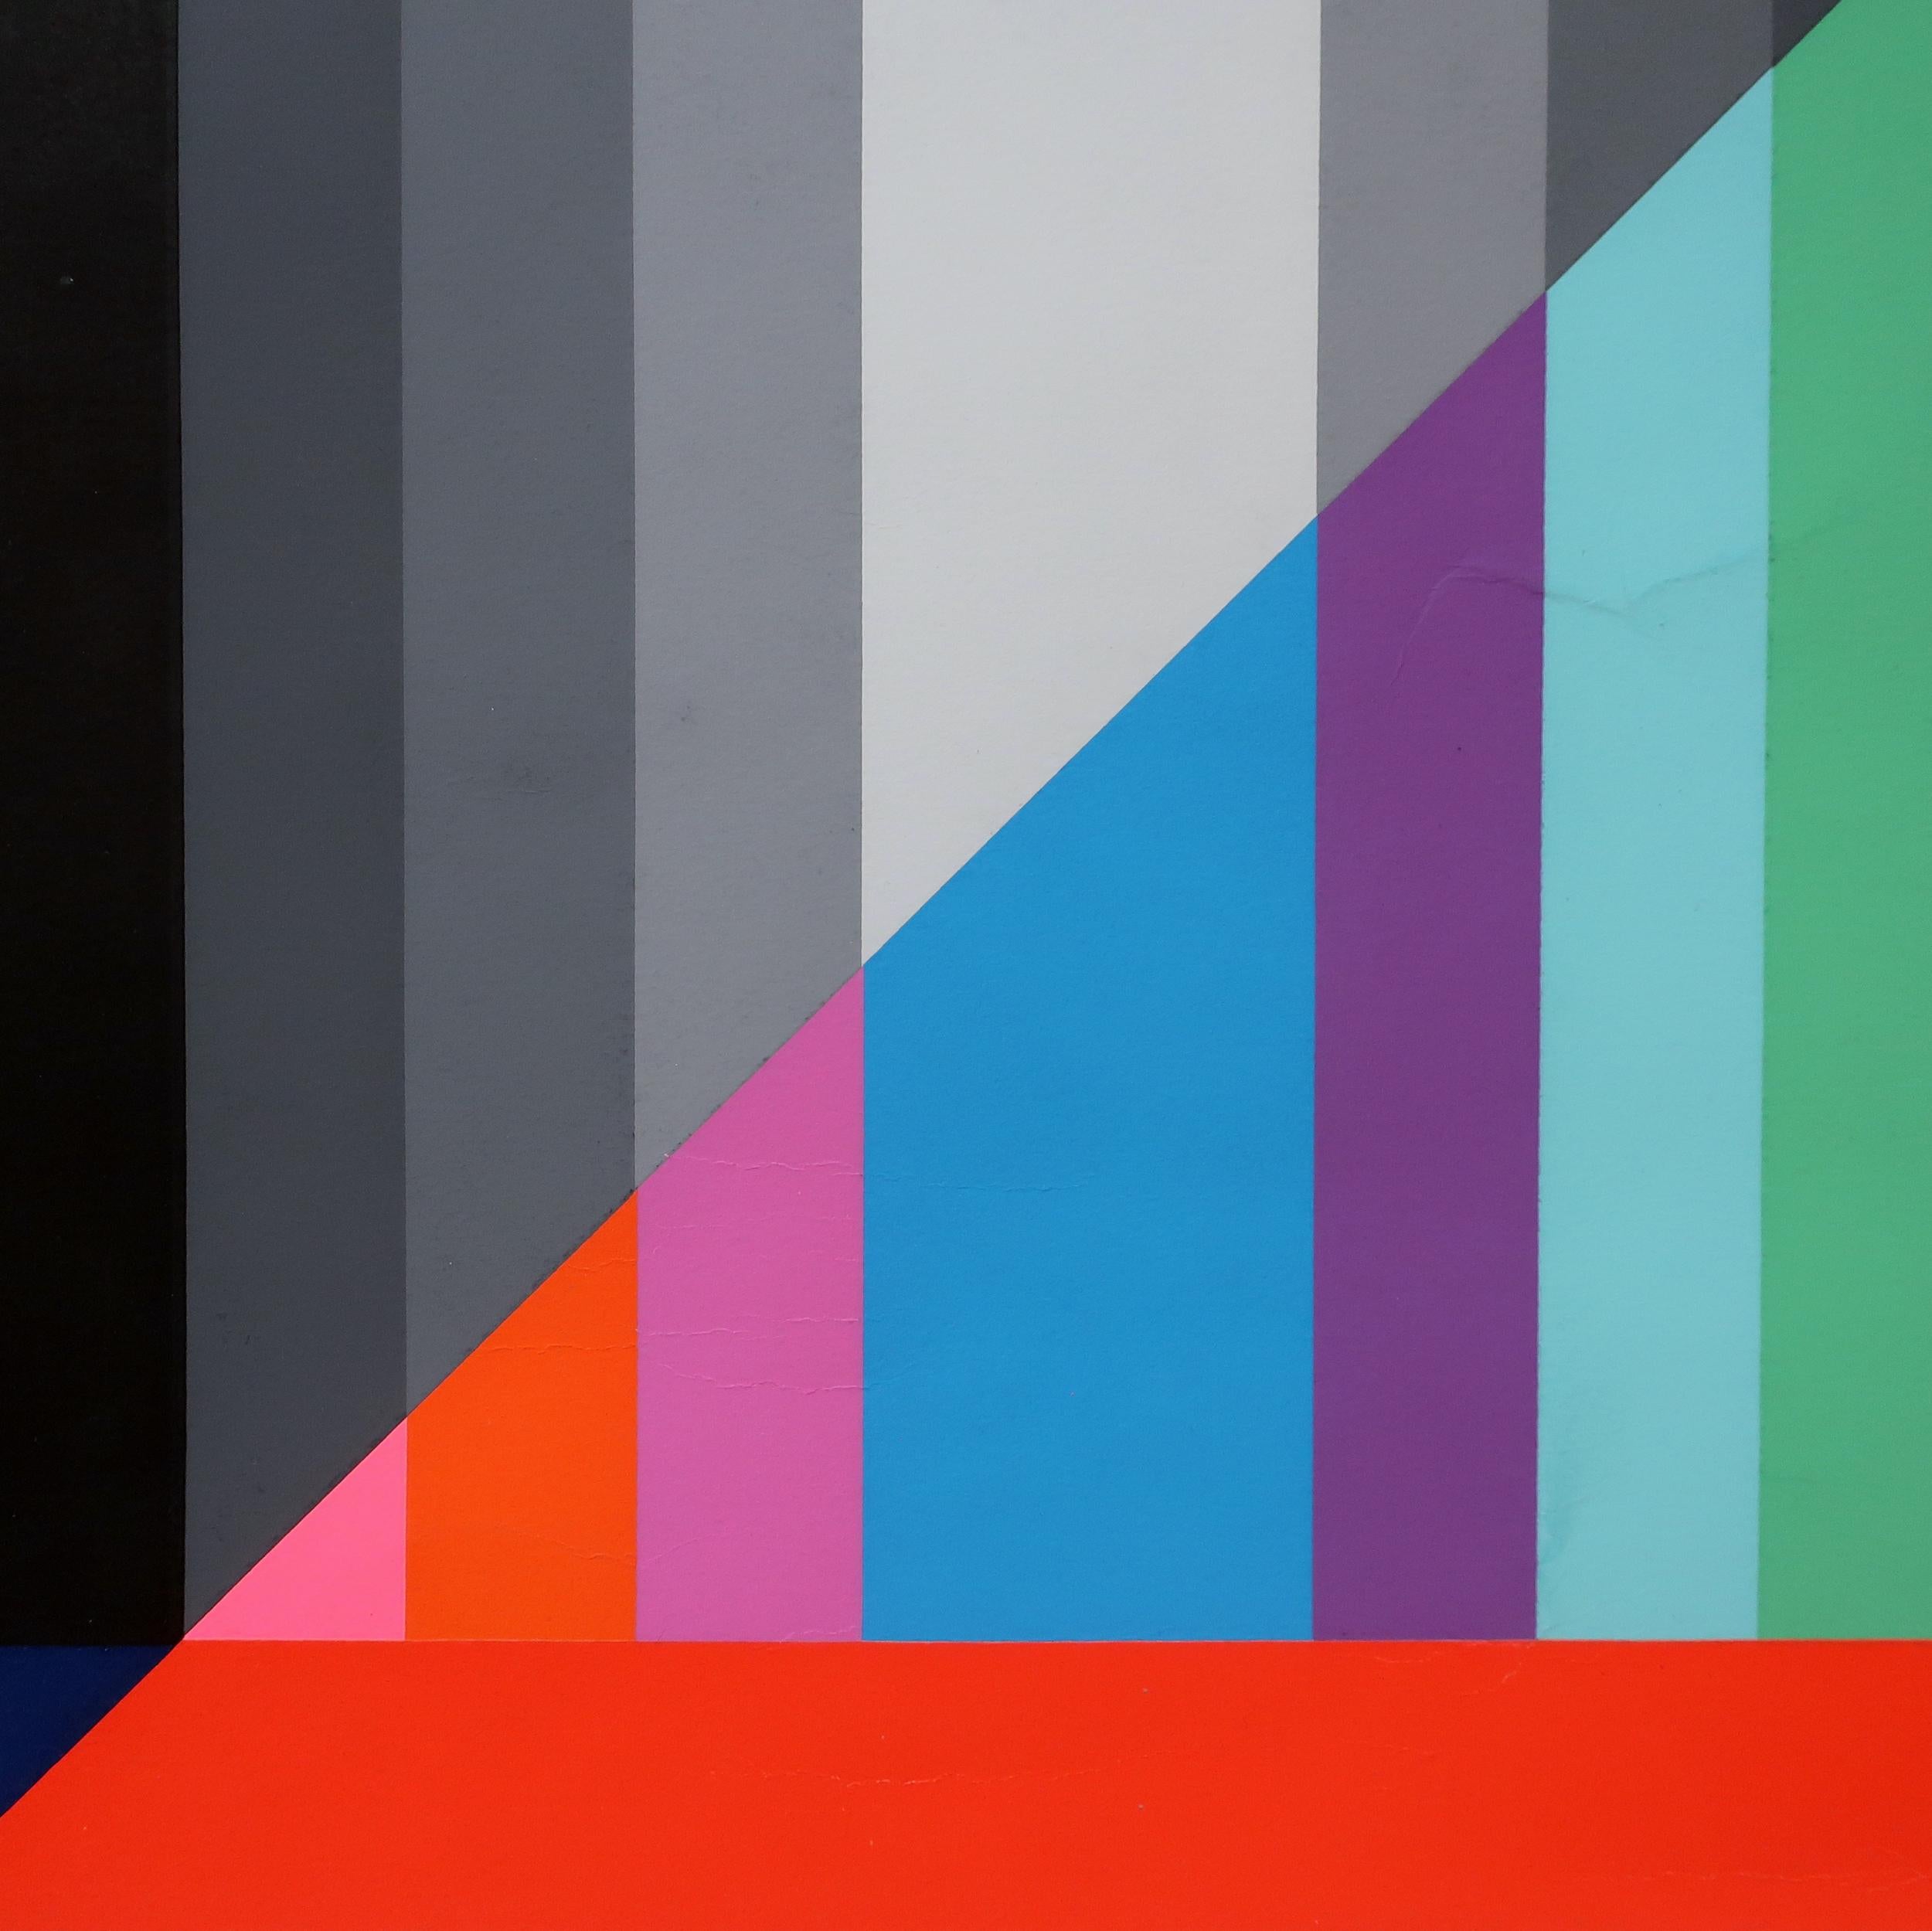 A striking limited edition op art serigraph by Italian artist Eugenio Carmi (1920 - 2016) in the hard edge style. An untitled abstract composition with a blue and red border, black triangle, vertical stripes in multiple shades of gray and multiple